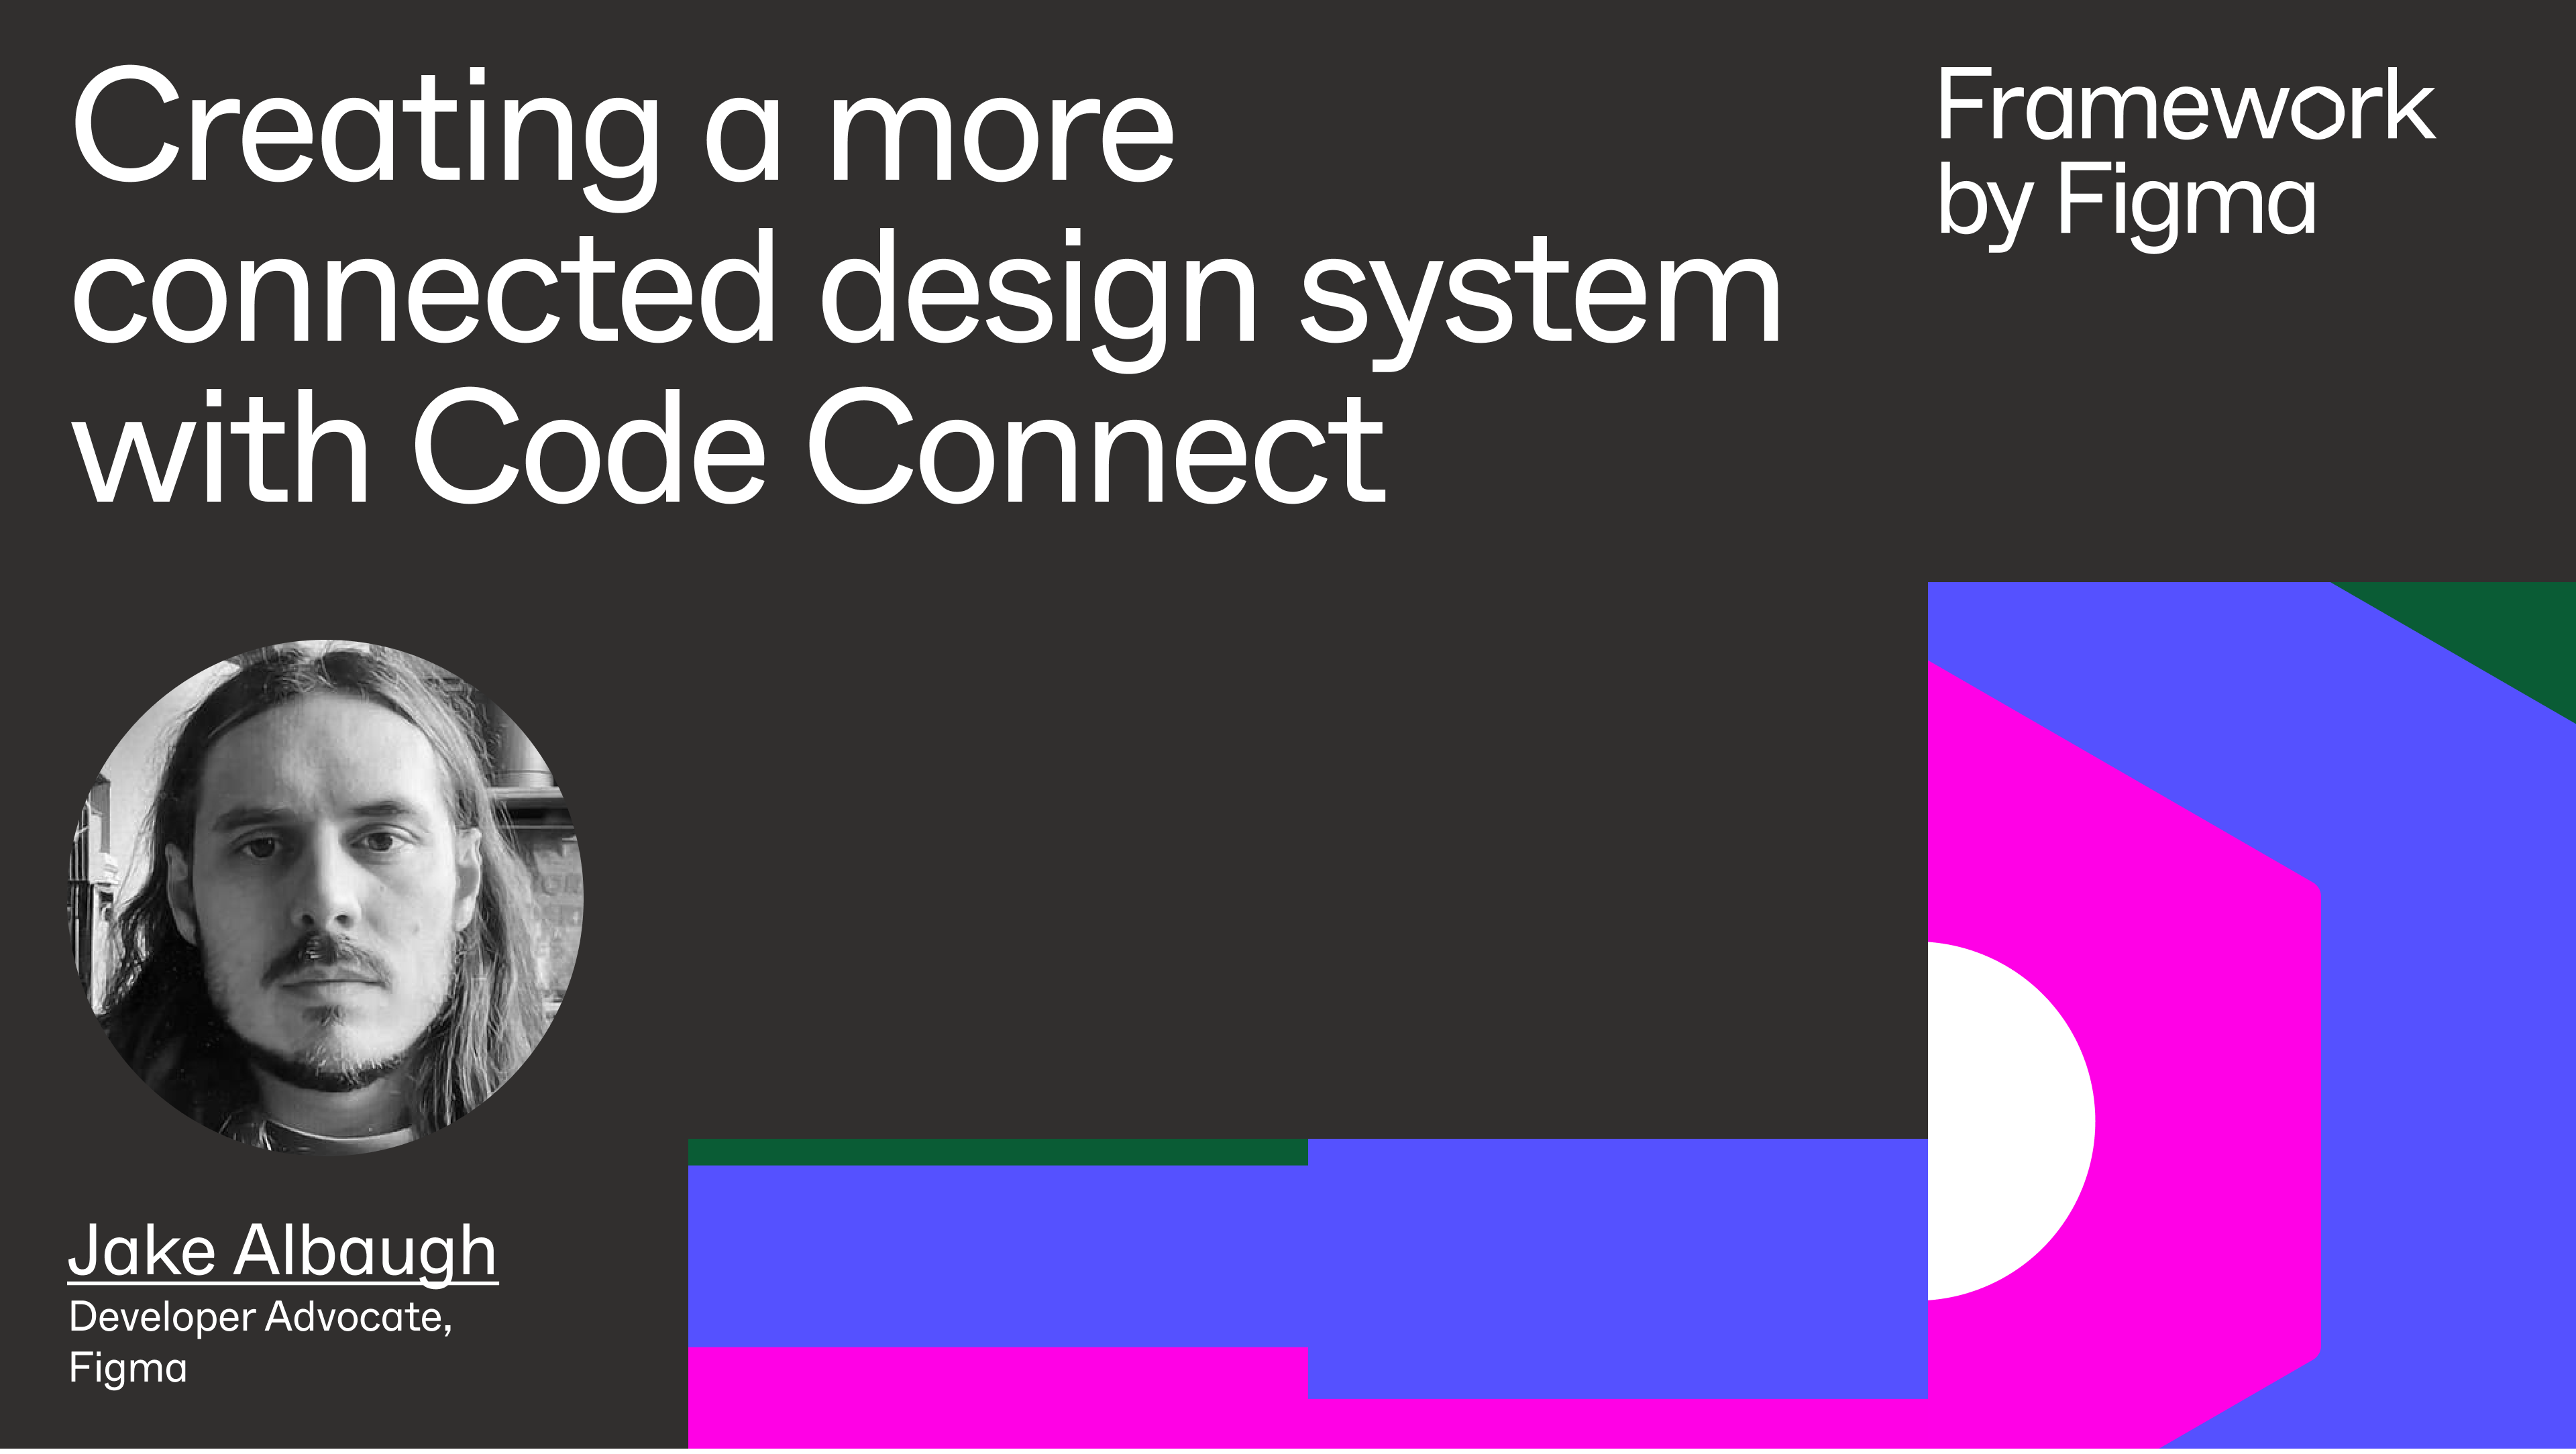 A title card with "Creating a more connected design system with Code Connect" text, displaying a photo and name of Jake Albaugh, Developer Advocate at Figma.